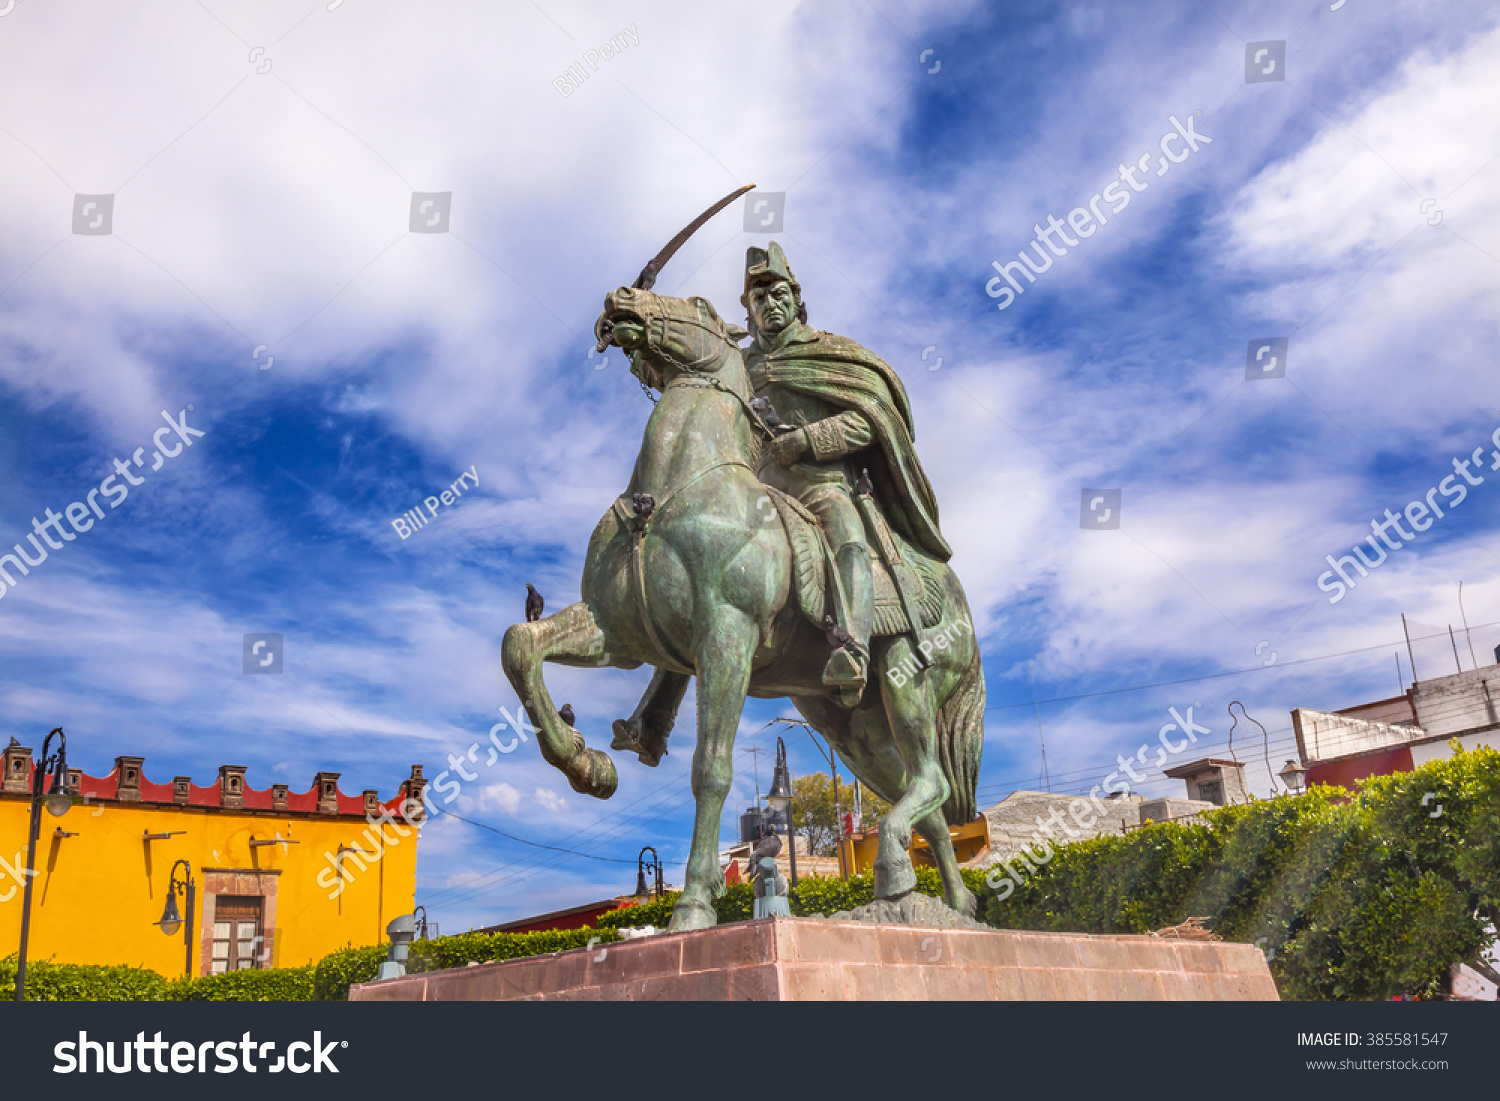 General Ignacio Allende Statue Plaza Civica San Miguel de Allende Mexico. General who first led revolt against Spain in 1810 and considered a hero of the Mexican War of Independence #385581547